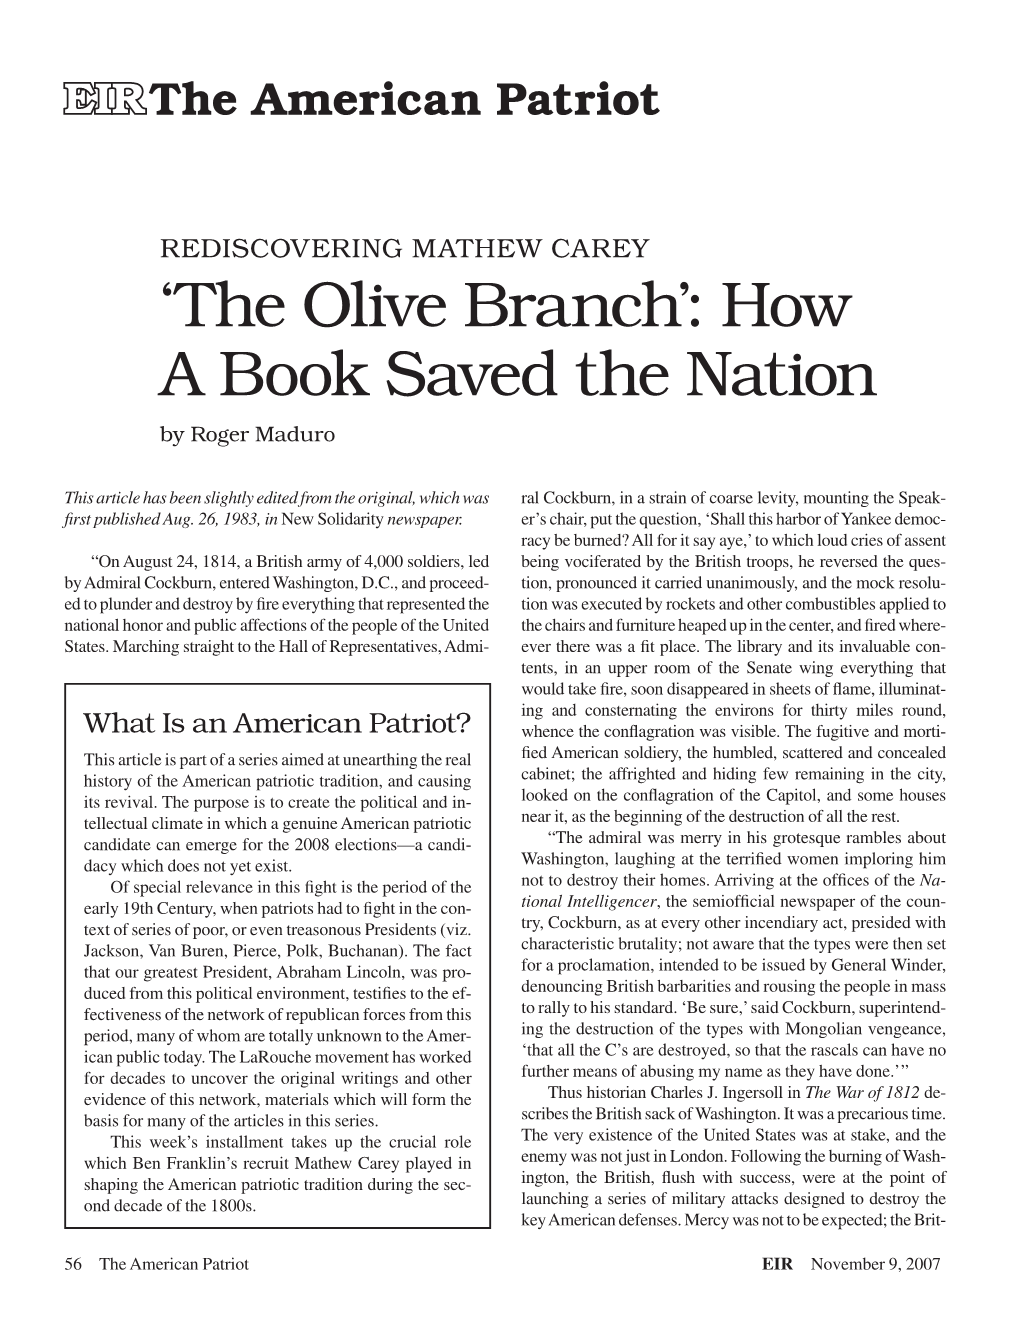 The Olive Branch’: How a Book Saved the Nation by Roger Maduro